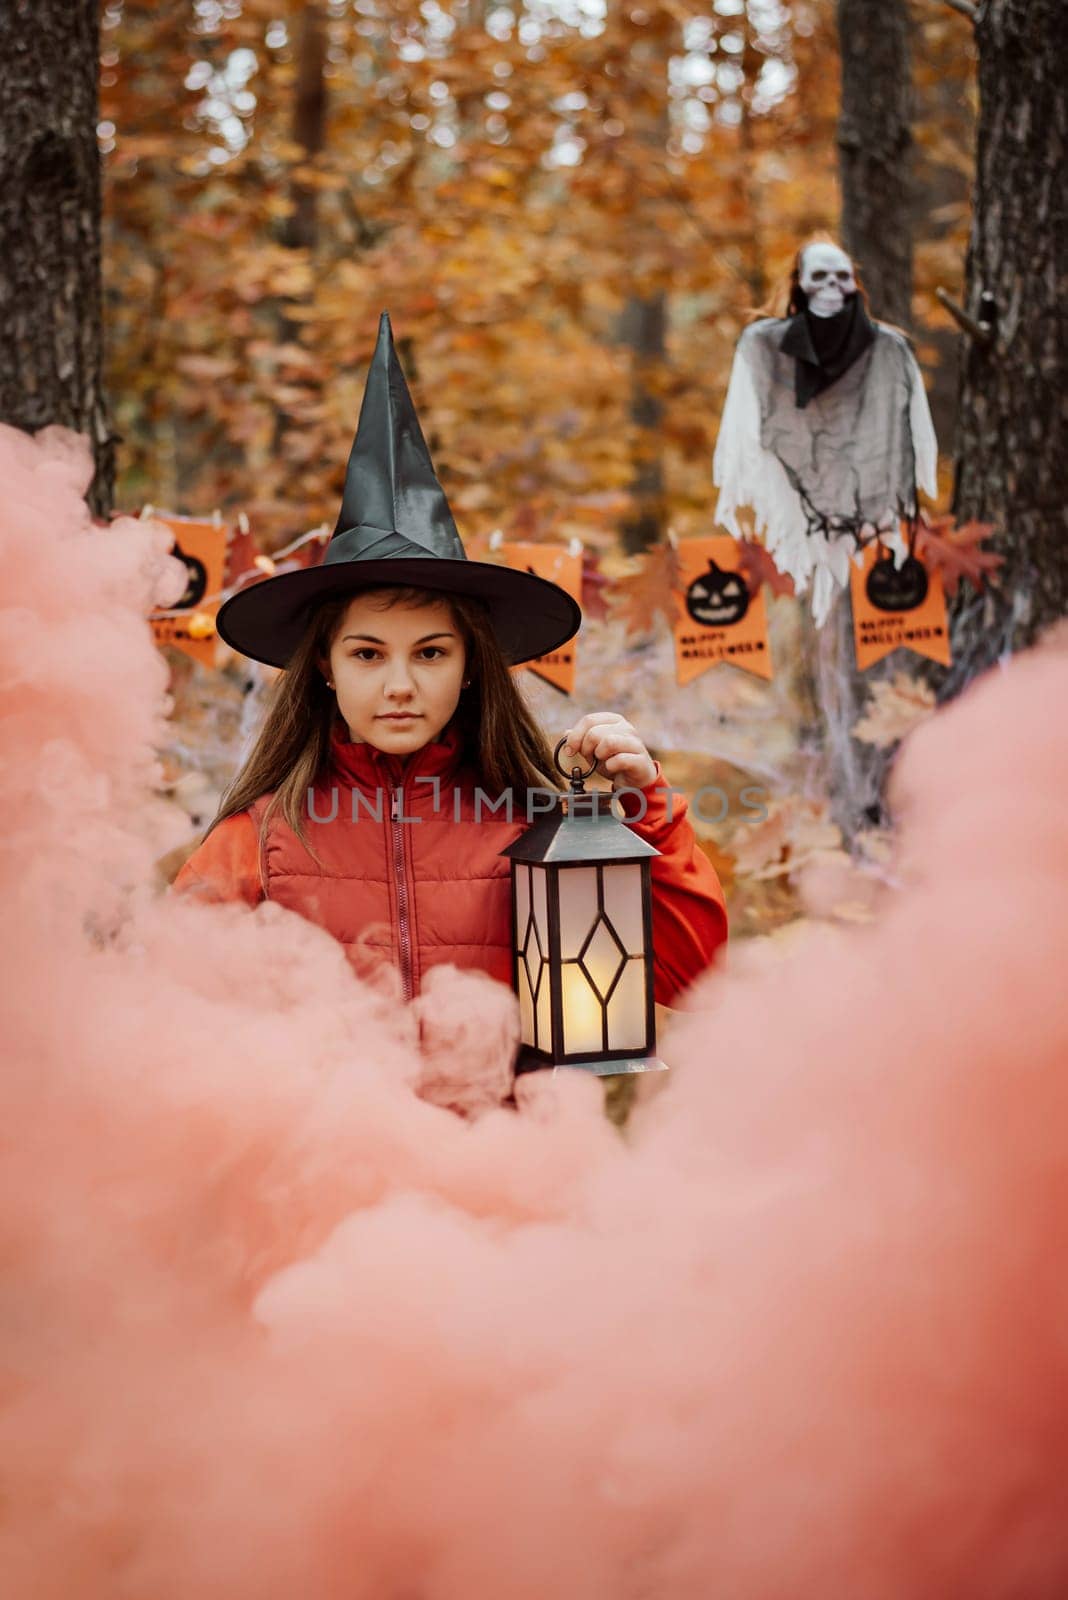 Decorations on the background, Halloween concept by VitaliiPetrushenko